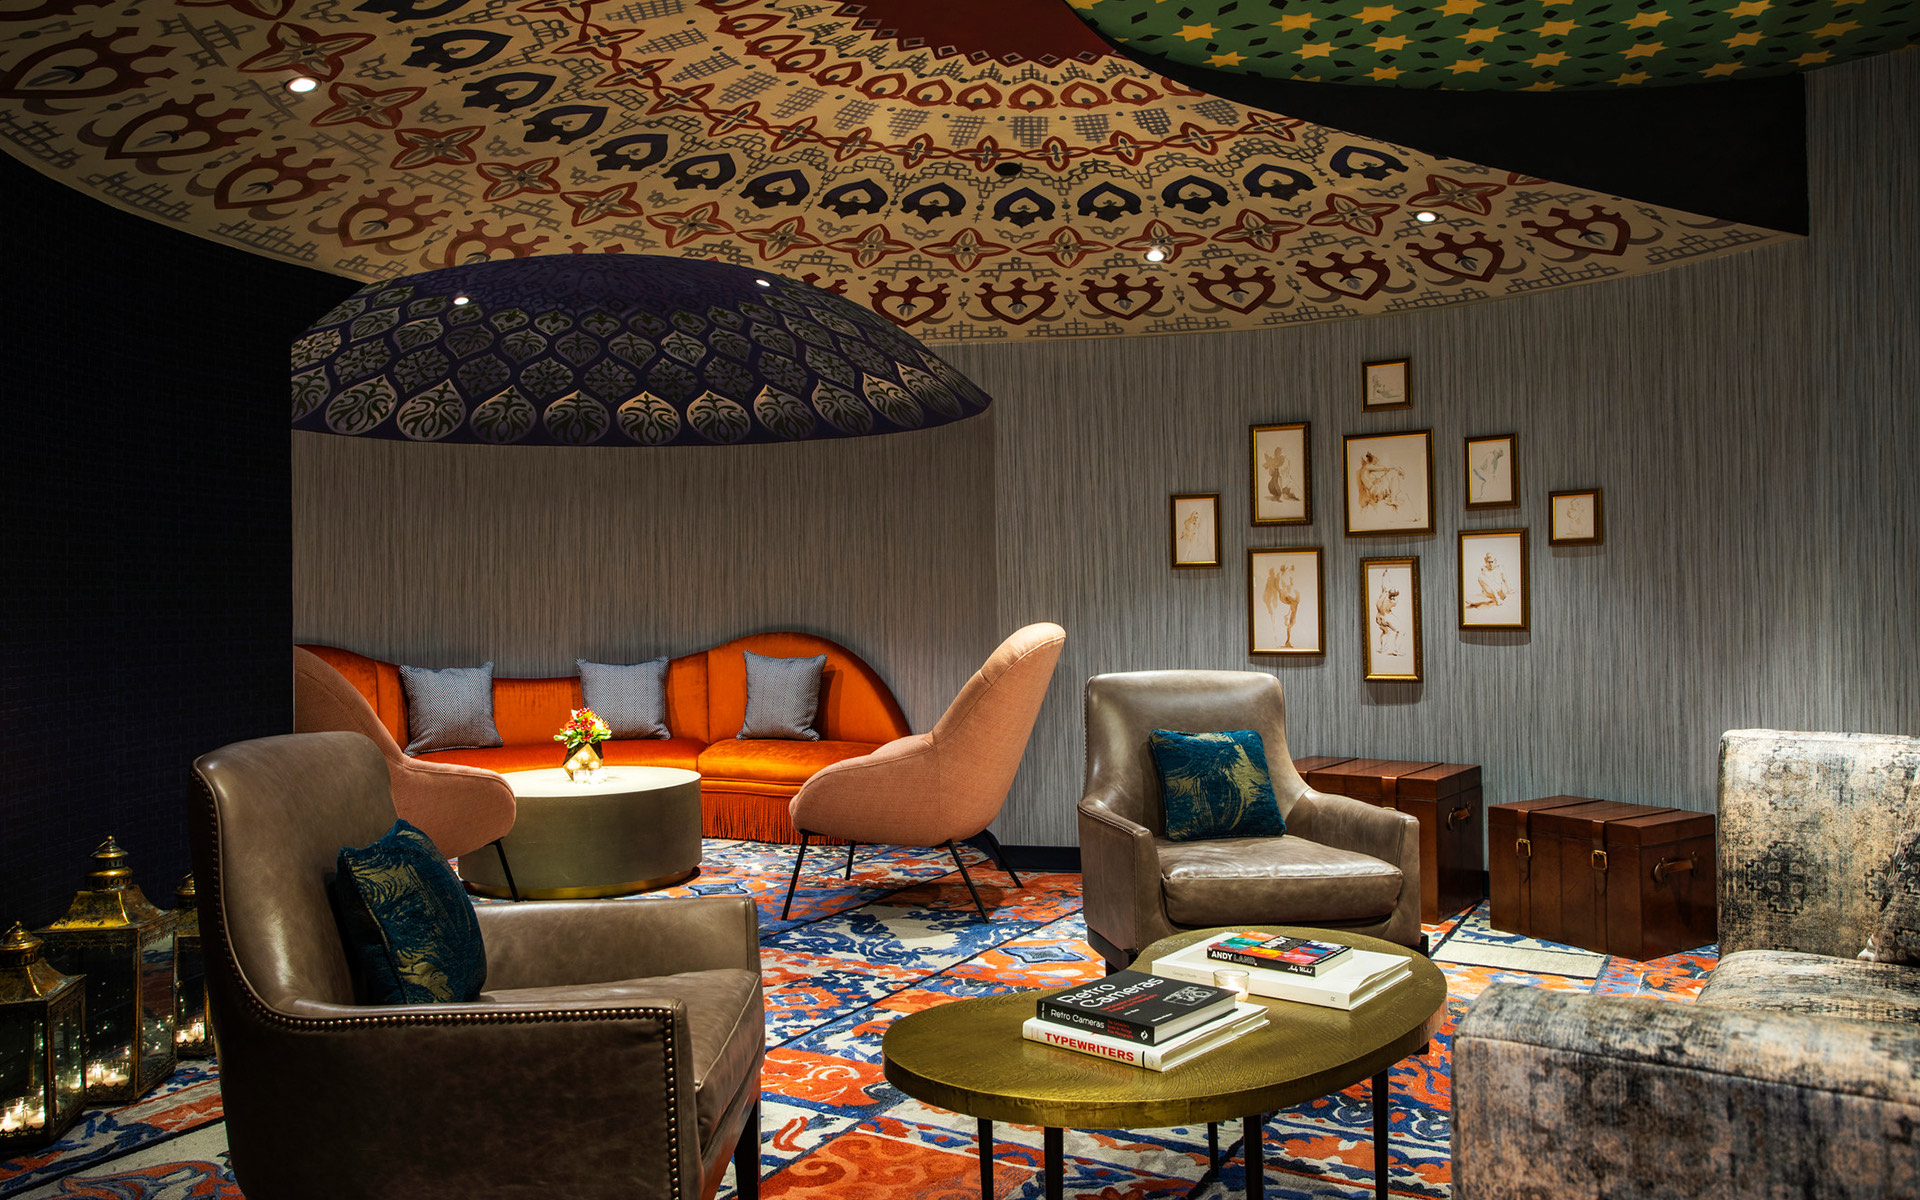 seating room with orange couch, gray chairs, and patterned ceiling